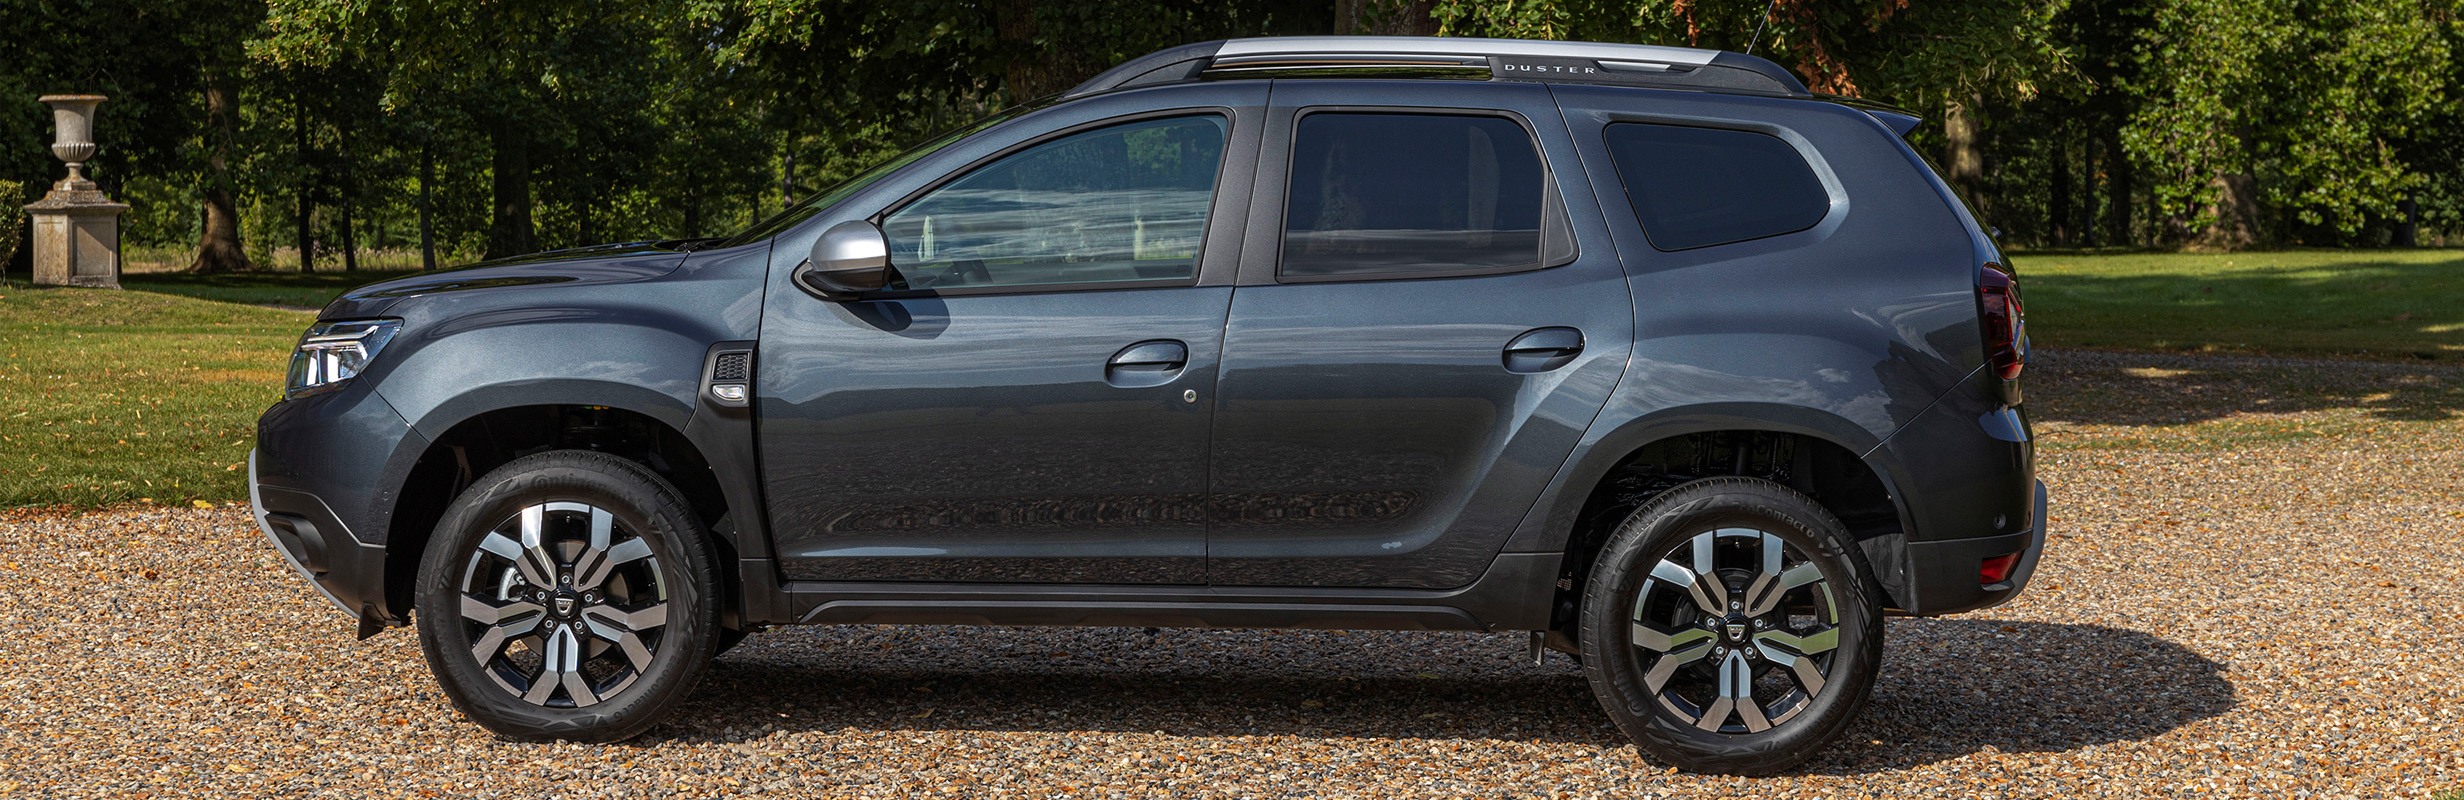 New Car Review: Dacia Duster 1.5 dCi Comfort - The AA